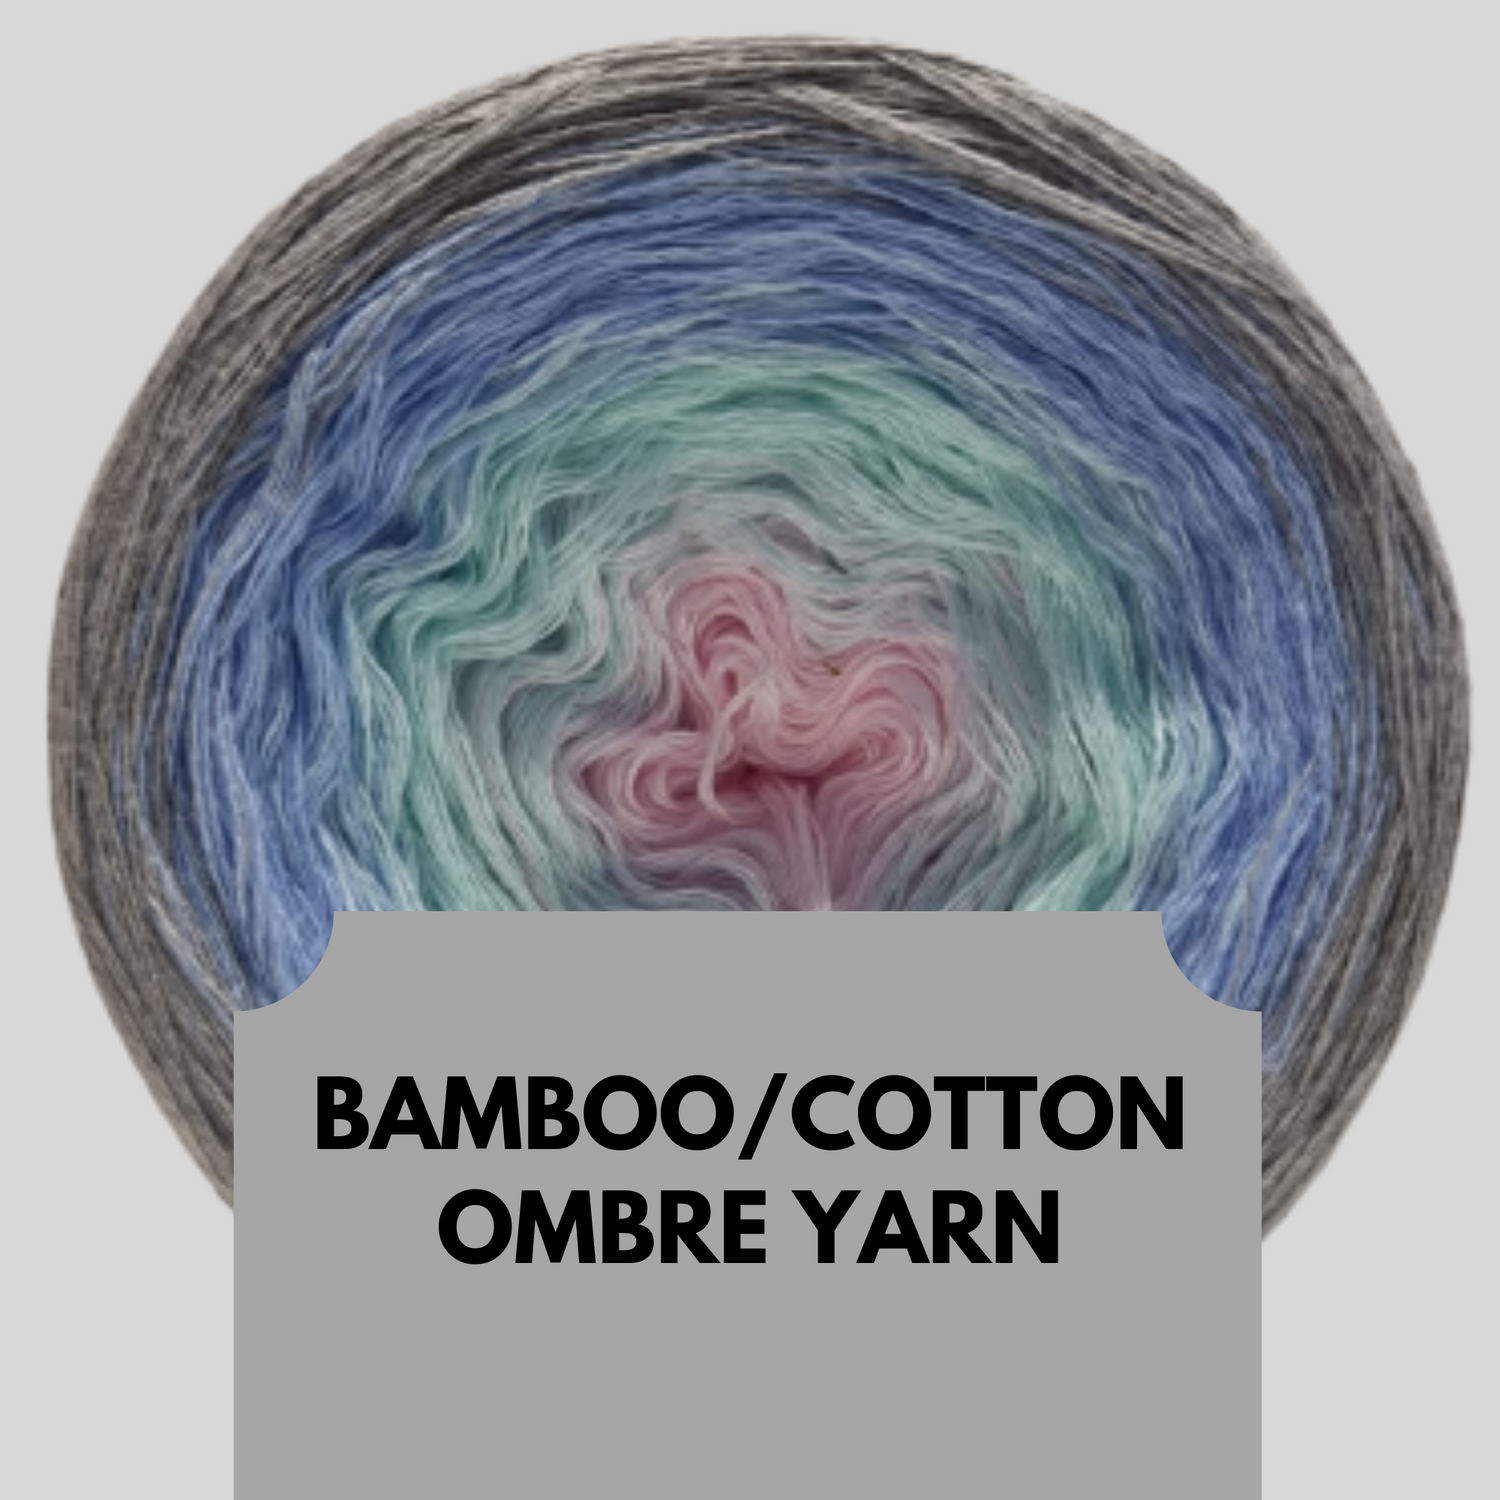 Bamboo/Cotton Ombre Yarn Cakes